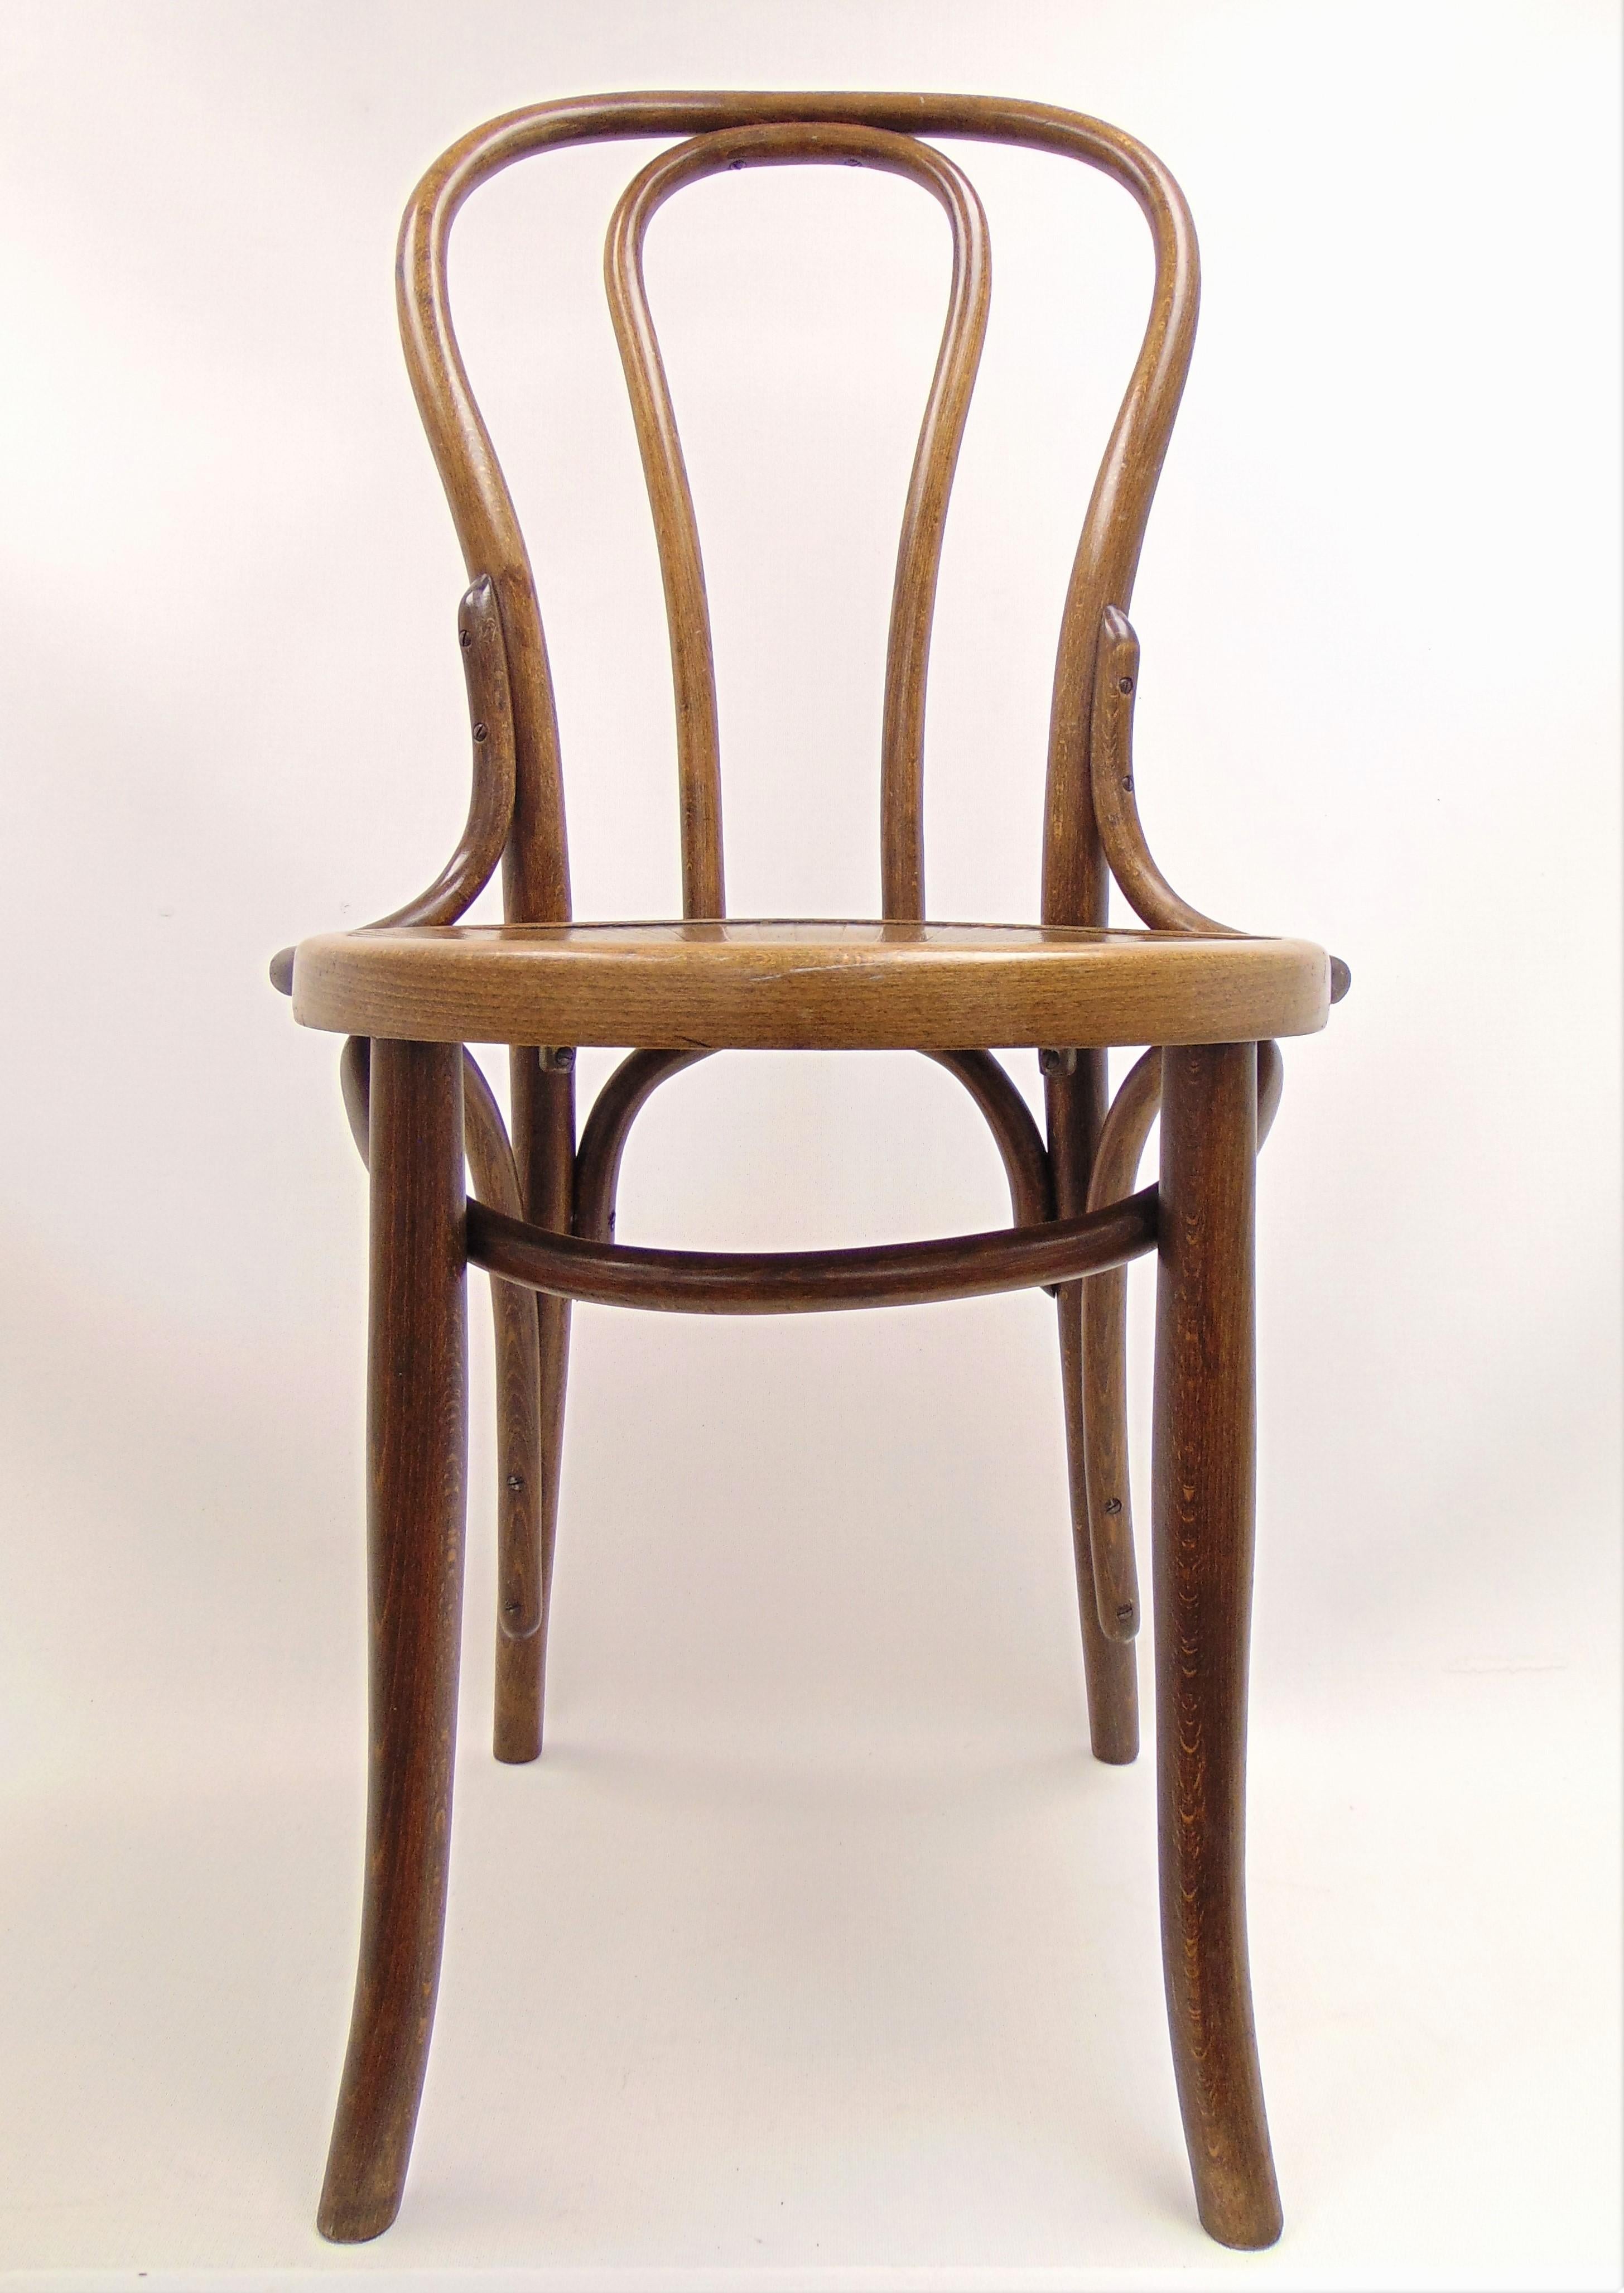 This is a stunning sculptural antique bentwood chair by Jacob & Josef Kohn from the early 1900s. The chair is in wonderful original condition. Made in Czechoslovakia.
The measurements are:
22'' depth
18'' width
35'' total height
18 1/2'' seat